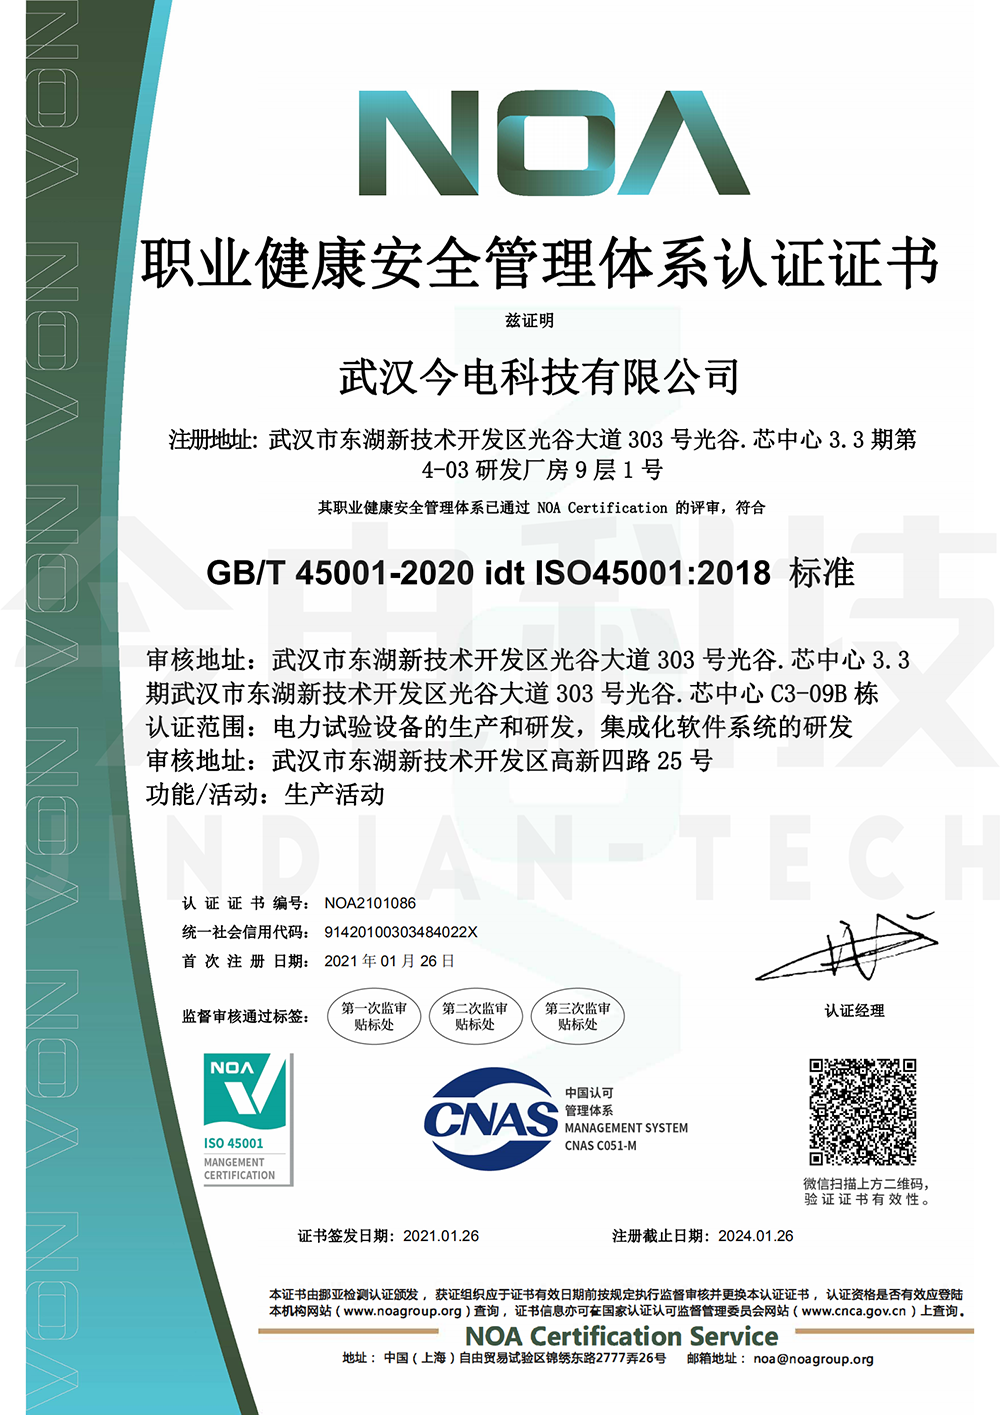 good news! ! Our company won the ISO "Three System Certification" certificate!